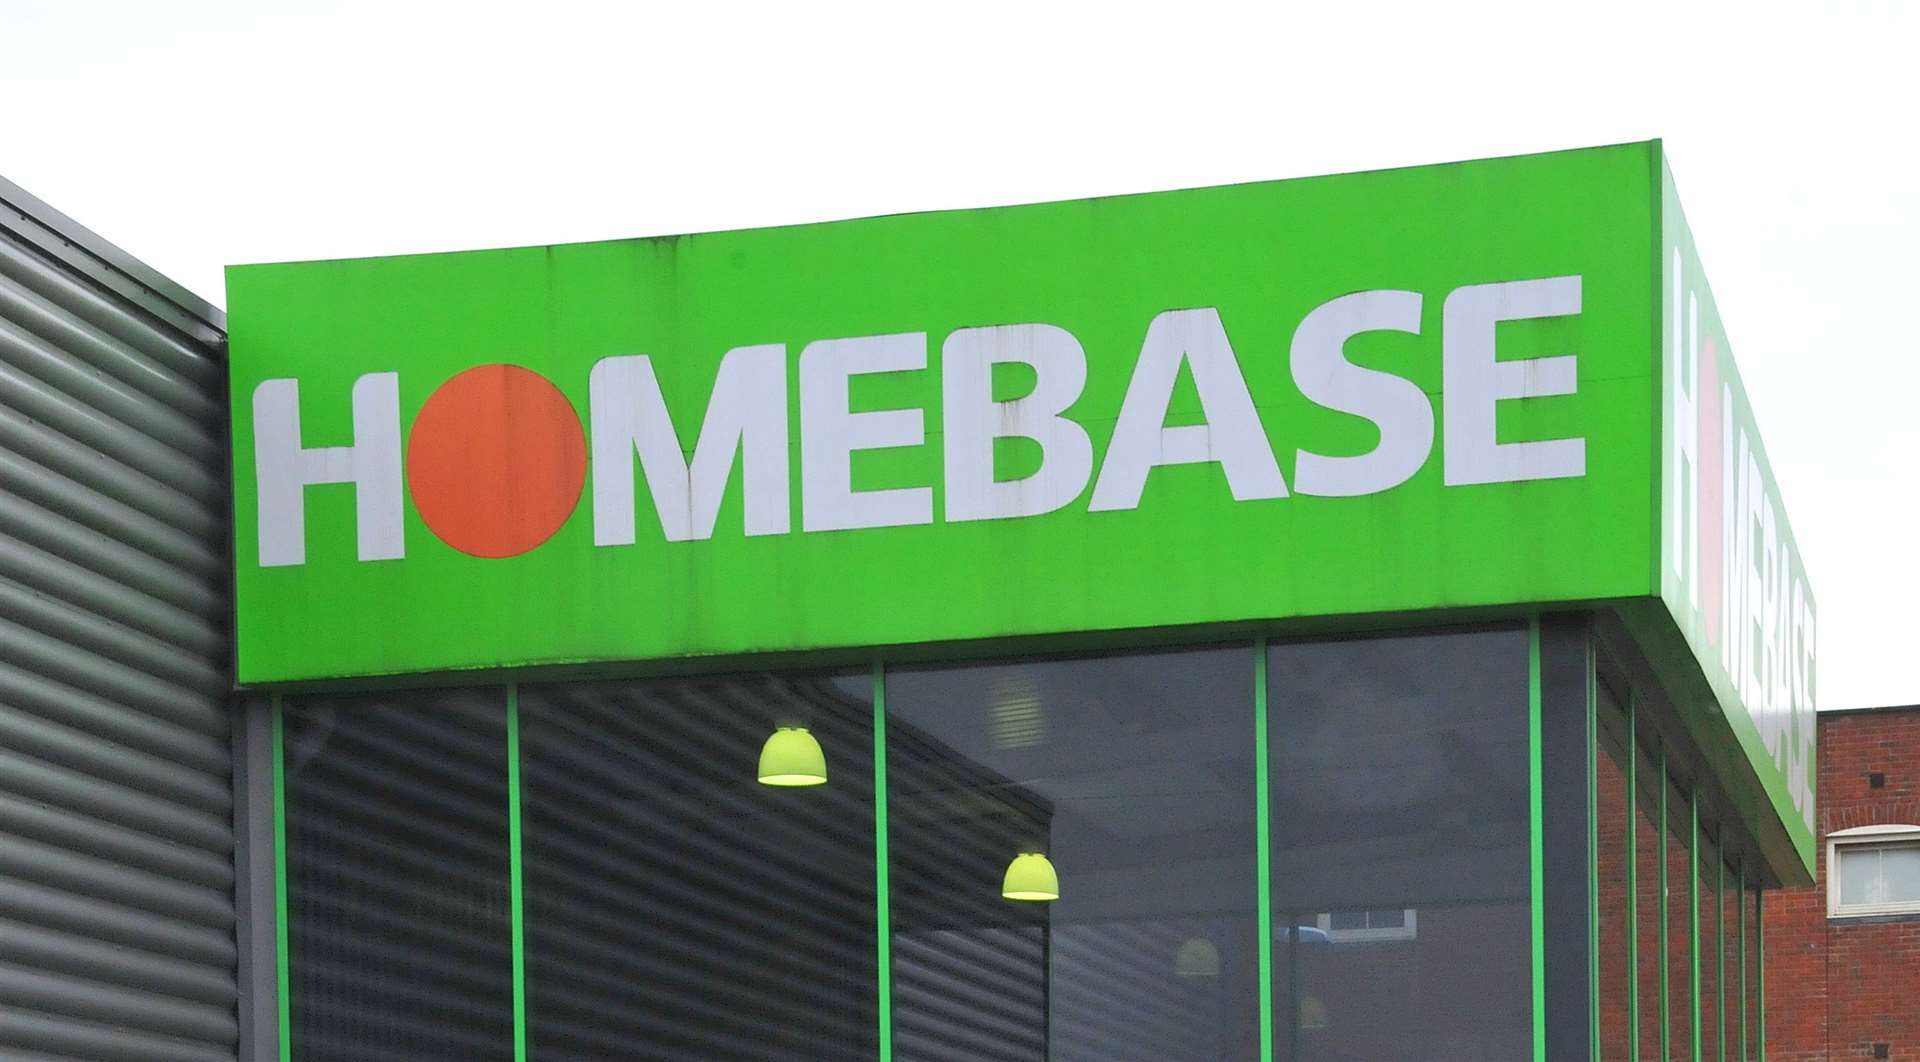 Homebase faces crucial meeting today